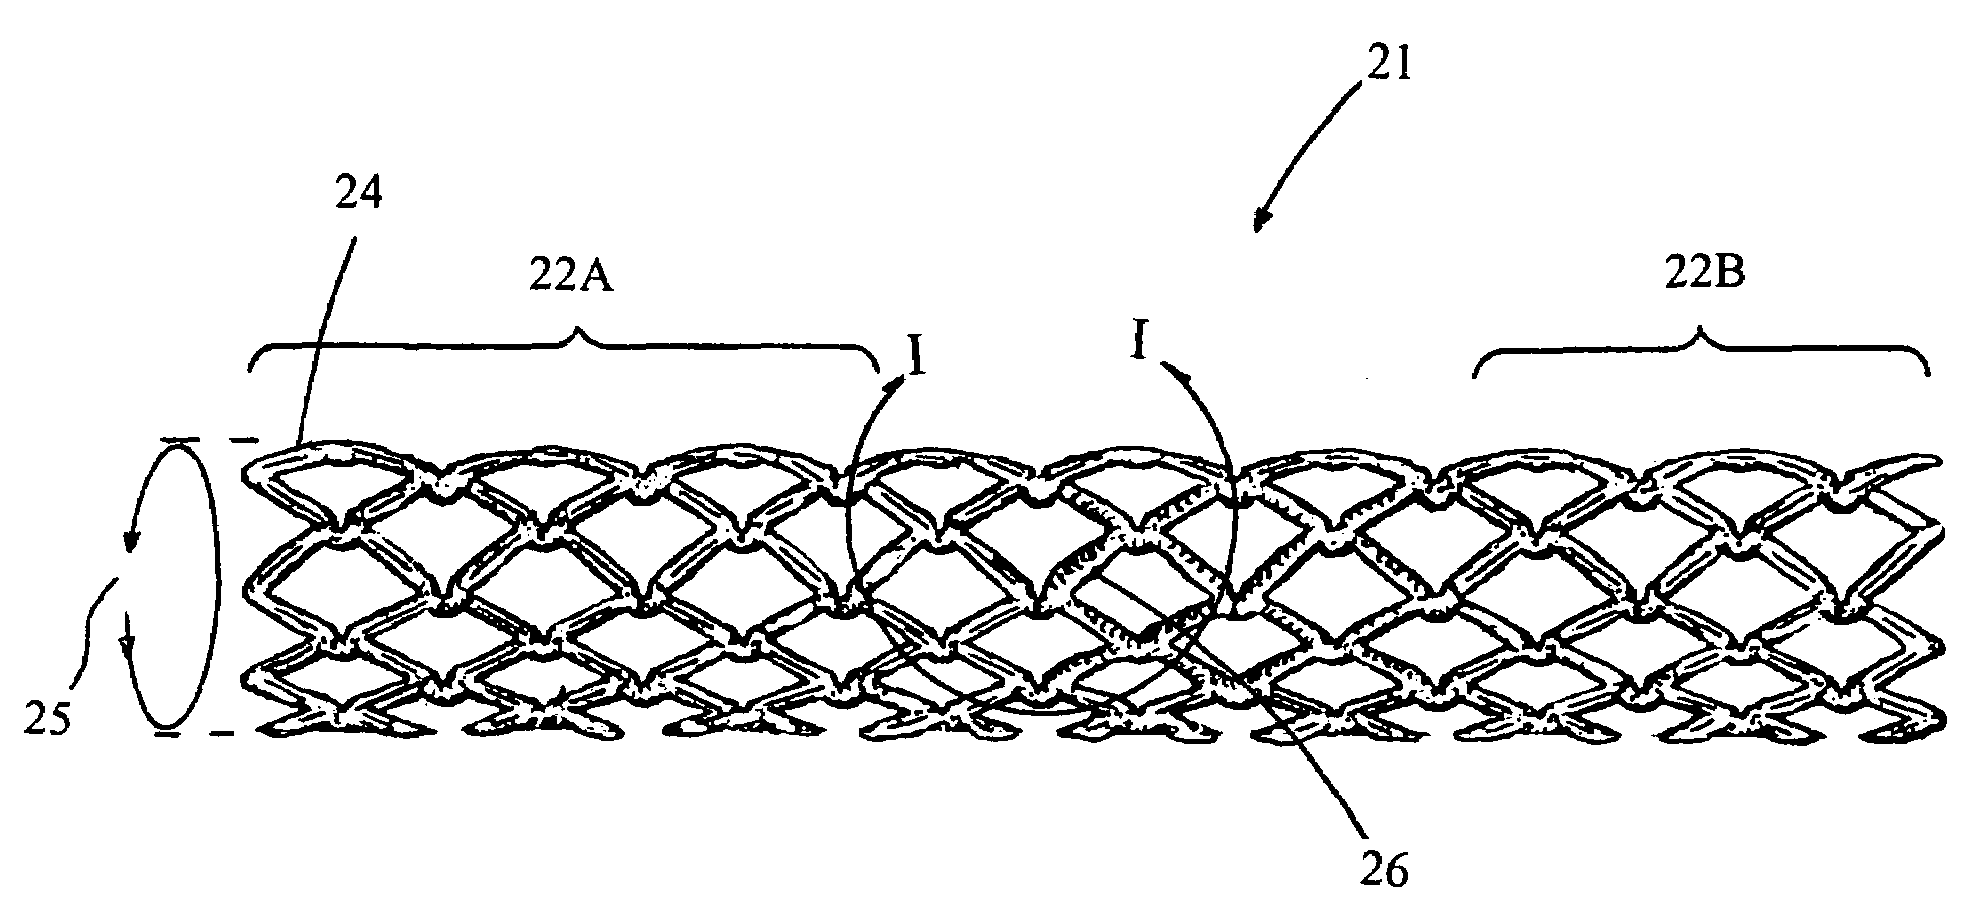 Drug-eluting stent having collagen drug carrier chemically treated with genipin